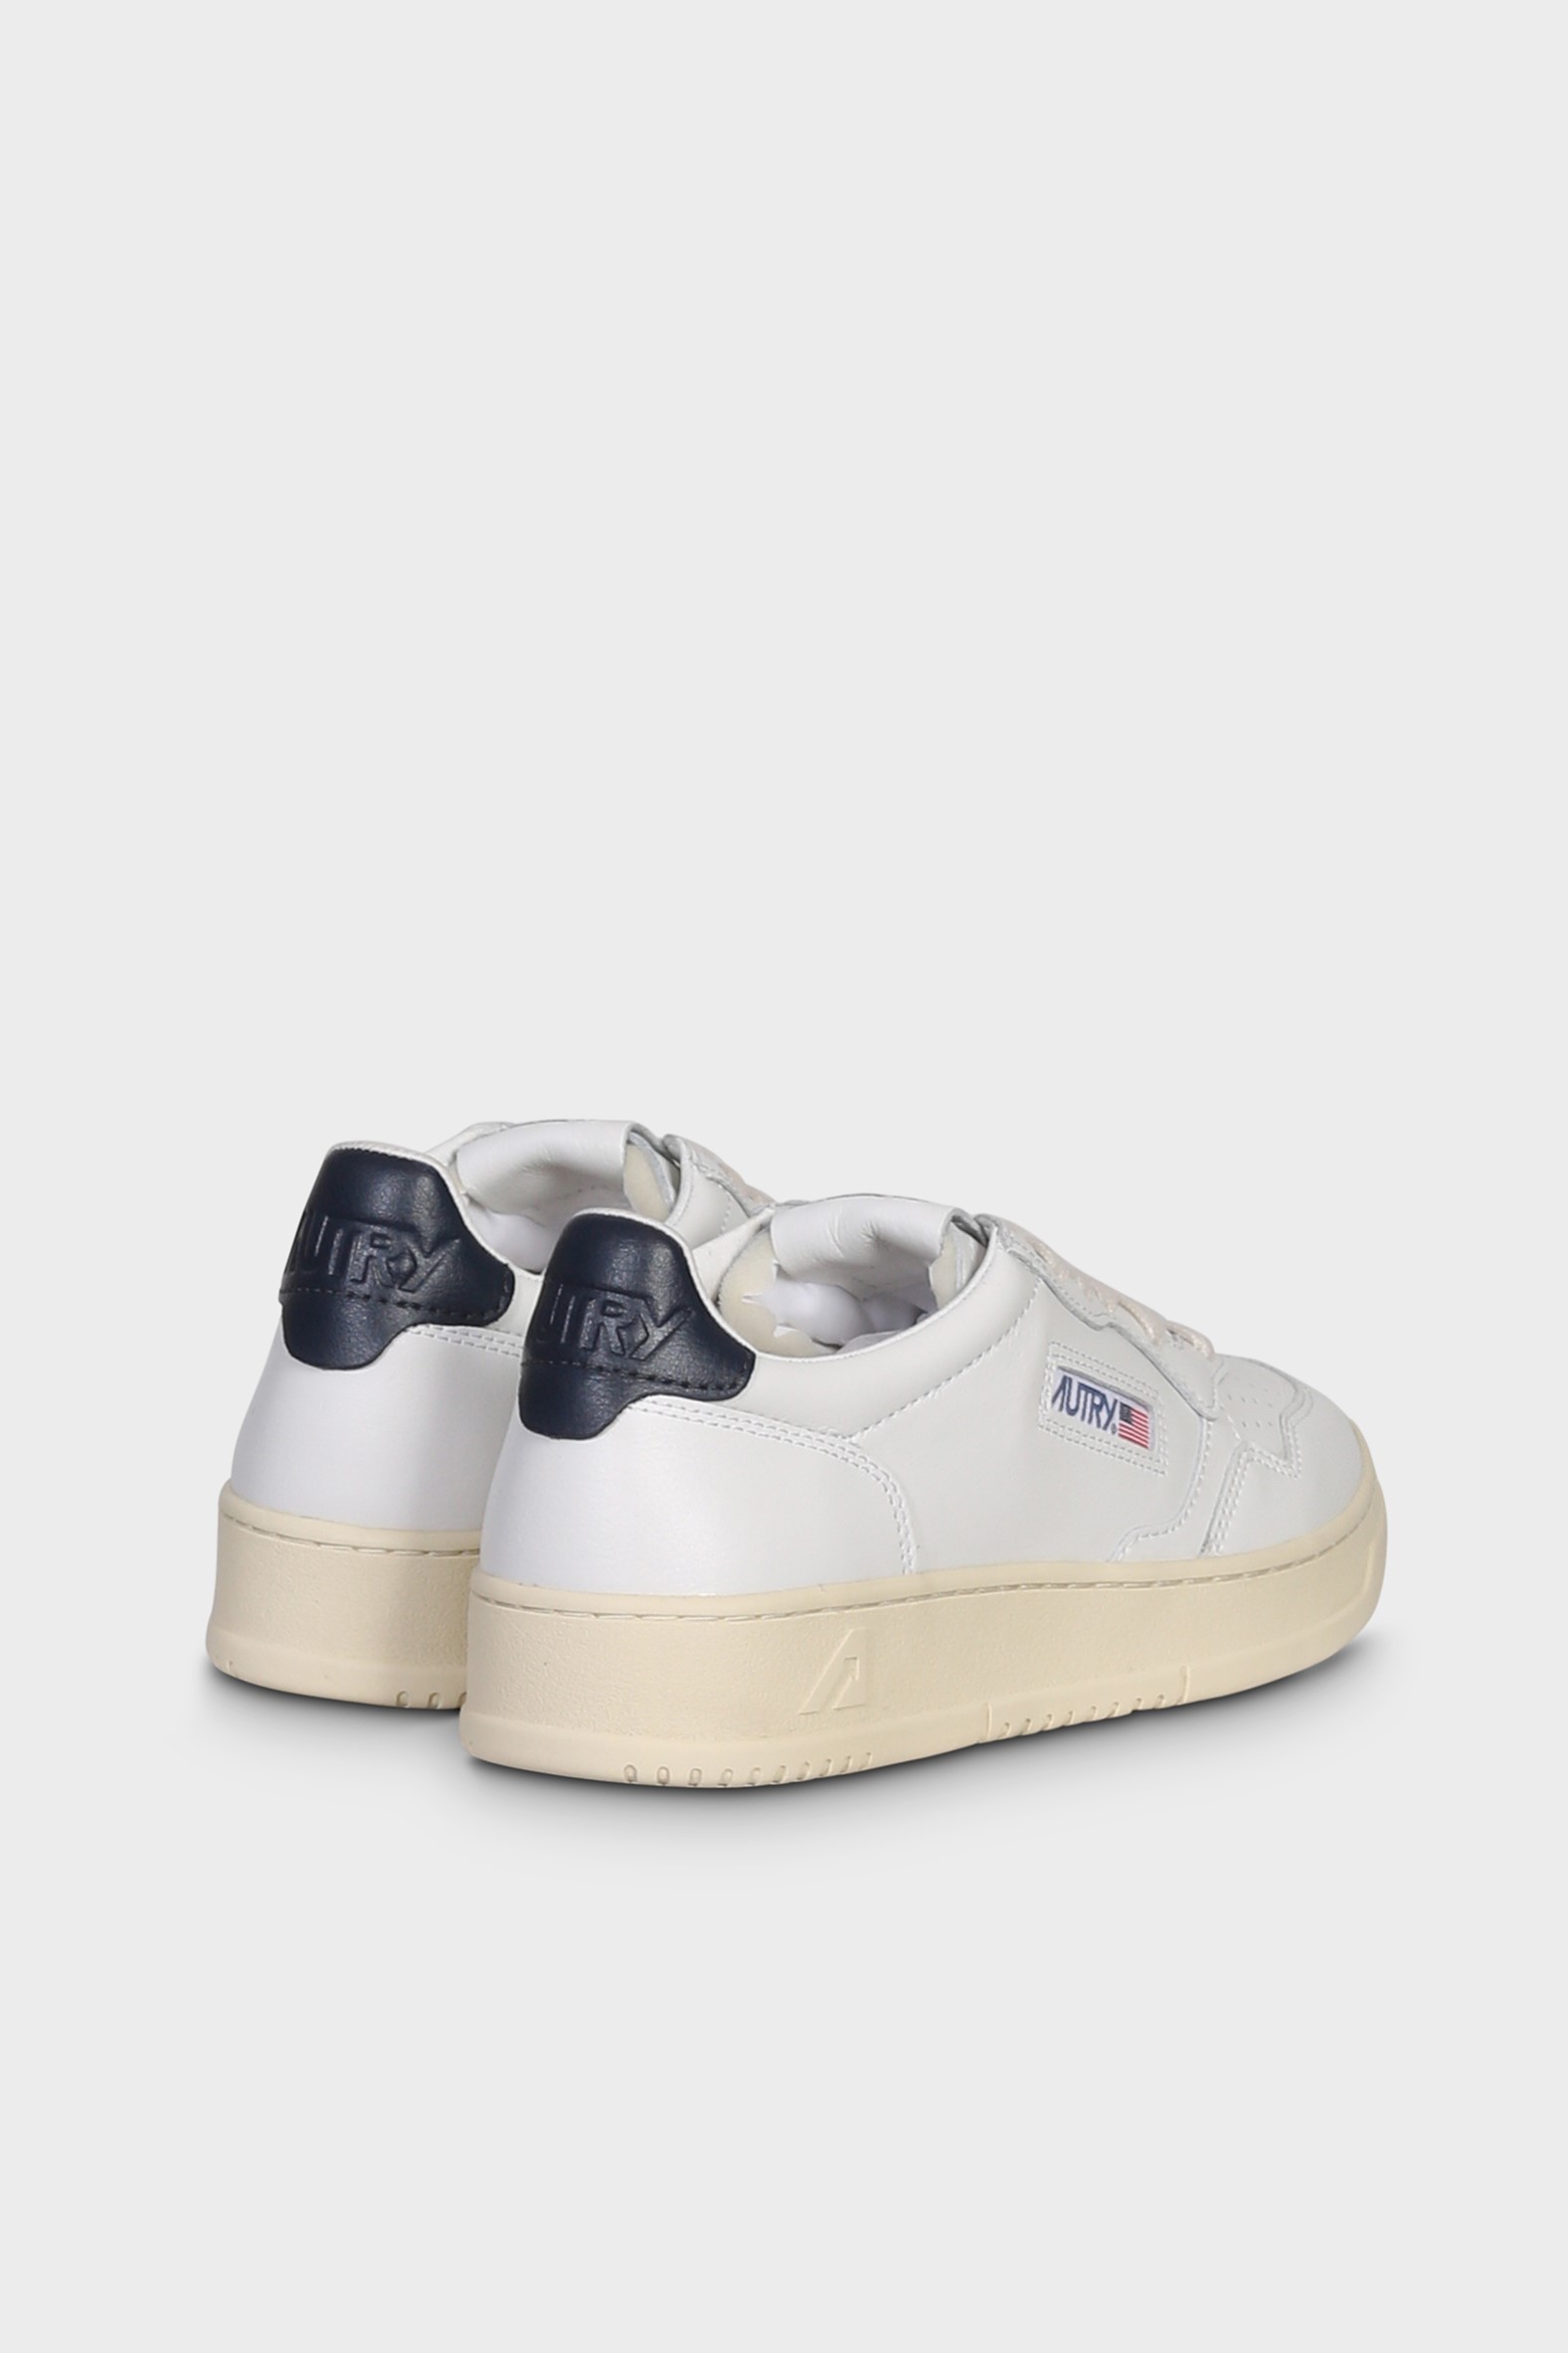 AUTRY ACTION SHOES Medalist Low Sneaker White/Space 40